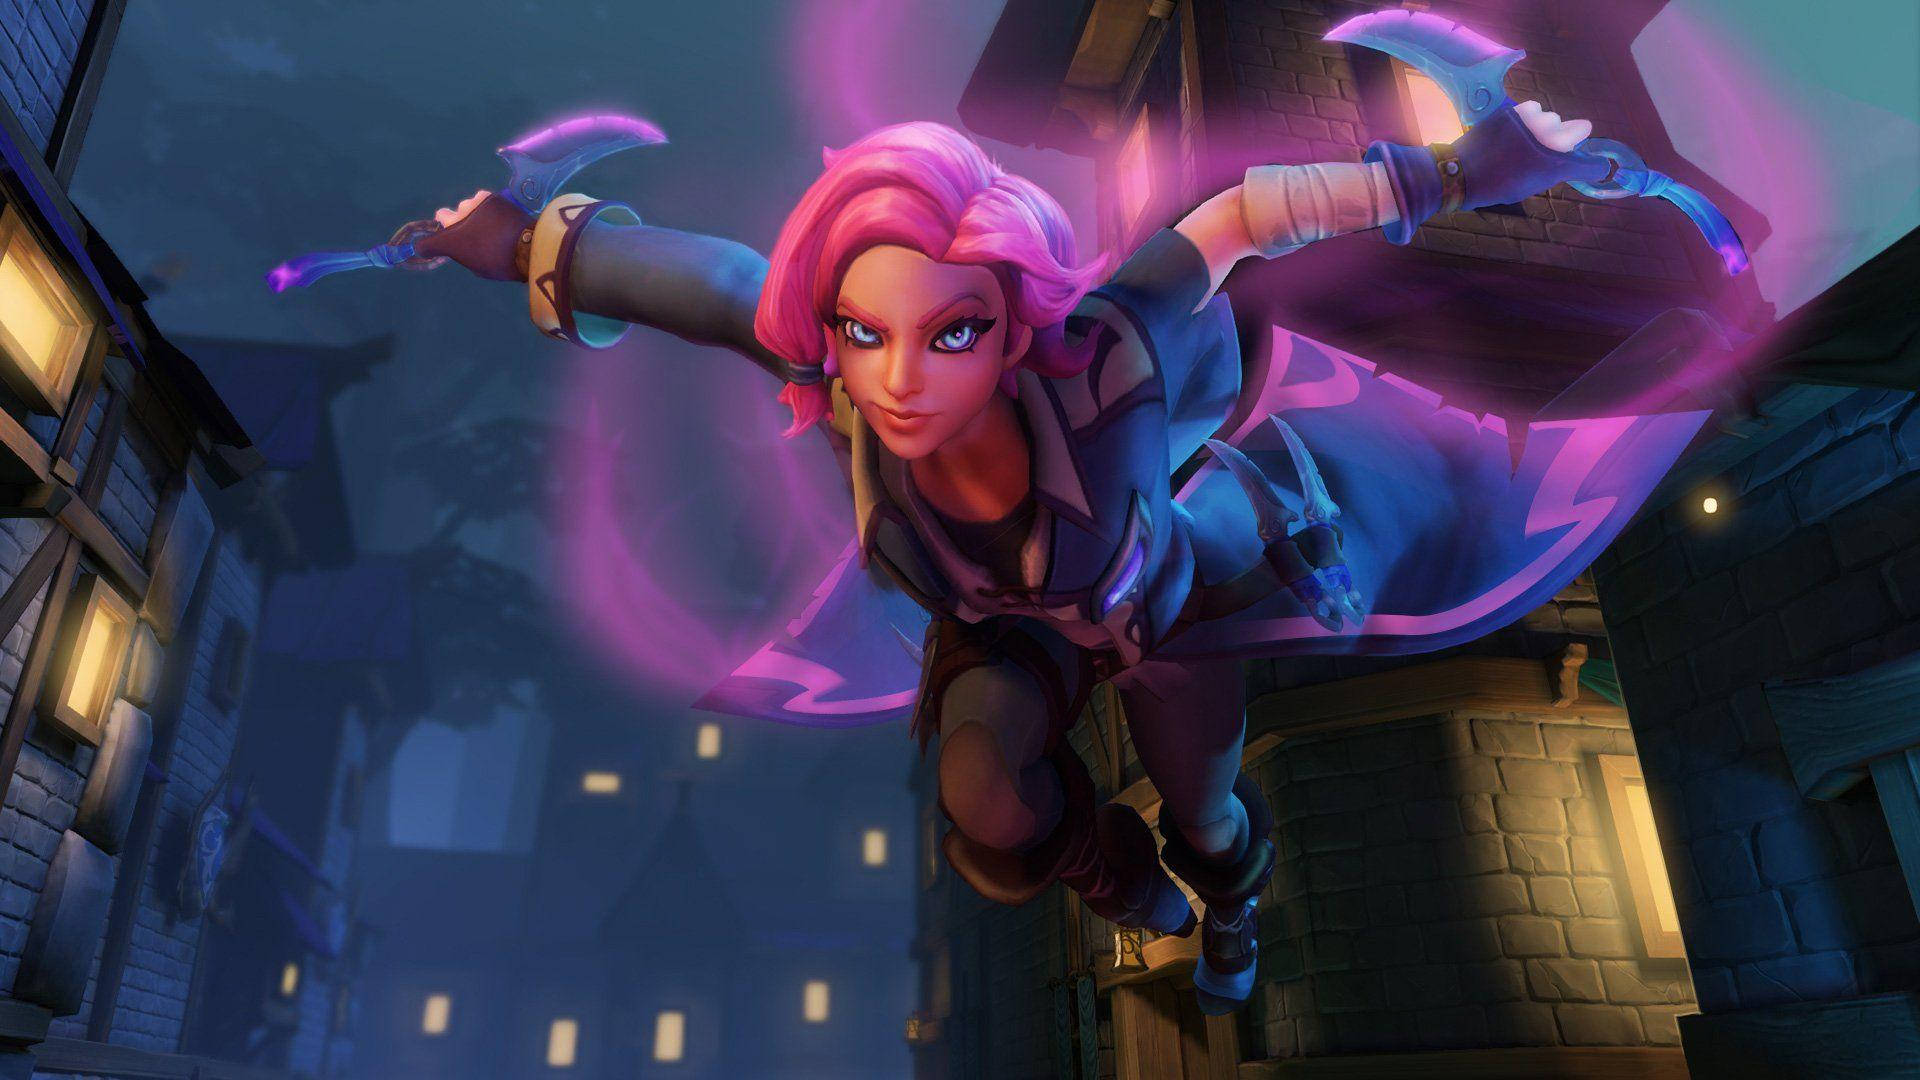 Video Game Paladins Maeve With Pounce And Daggers Wallpaper